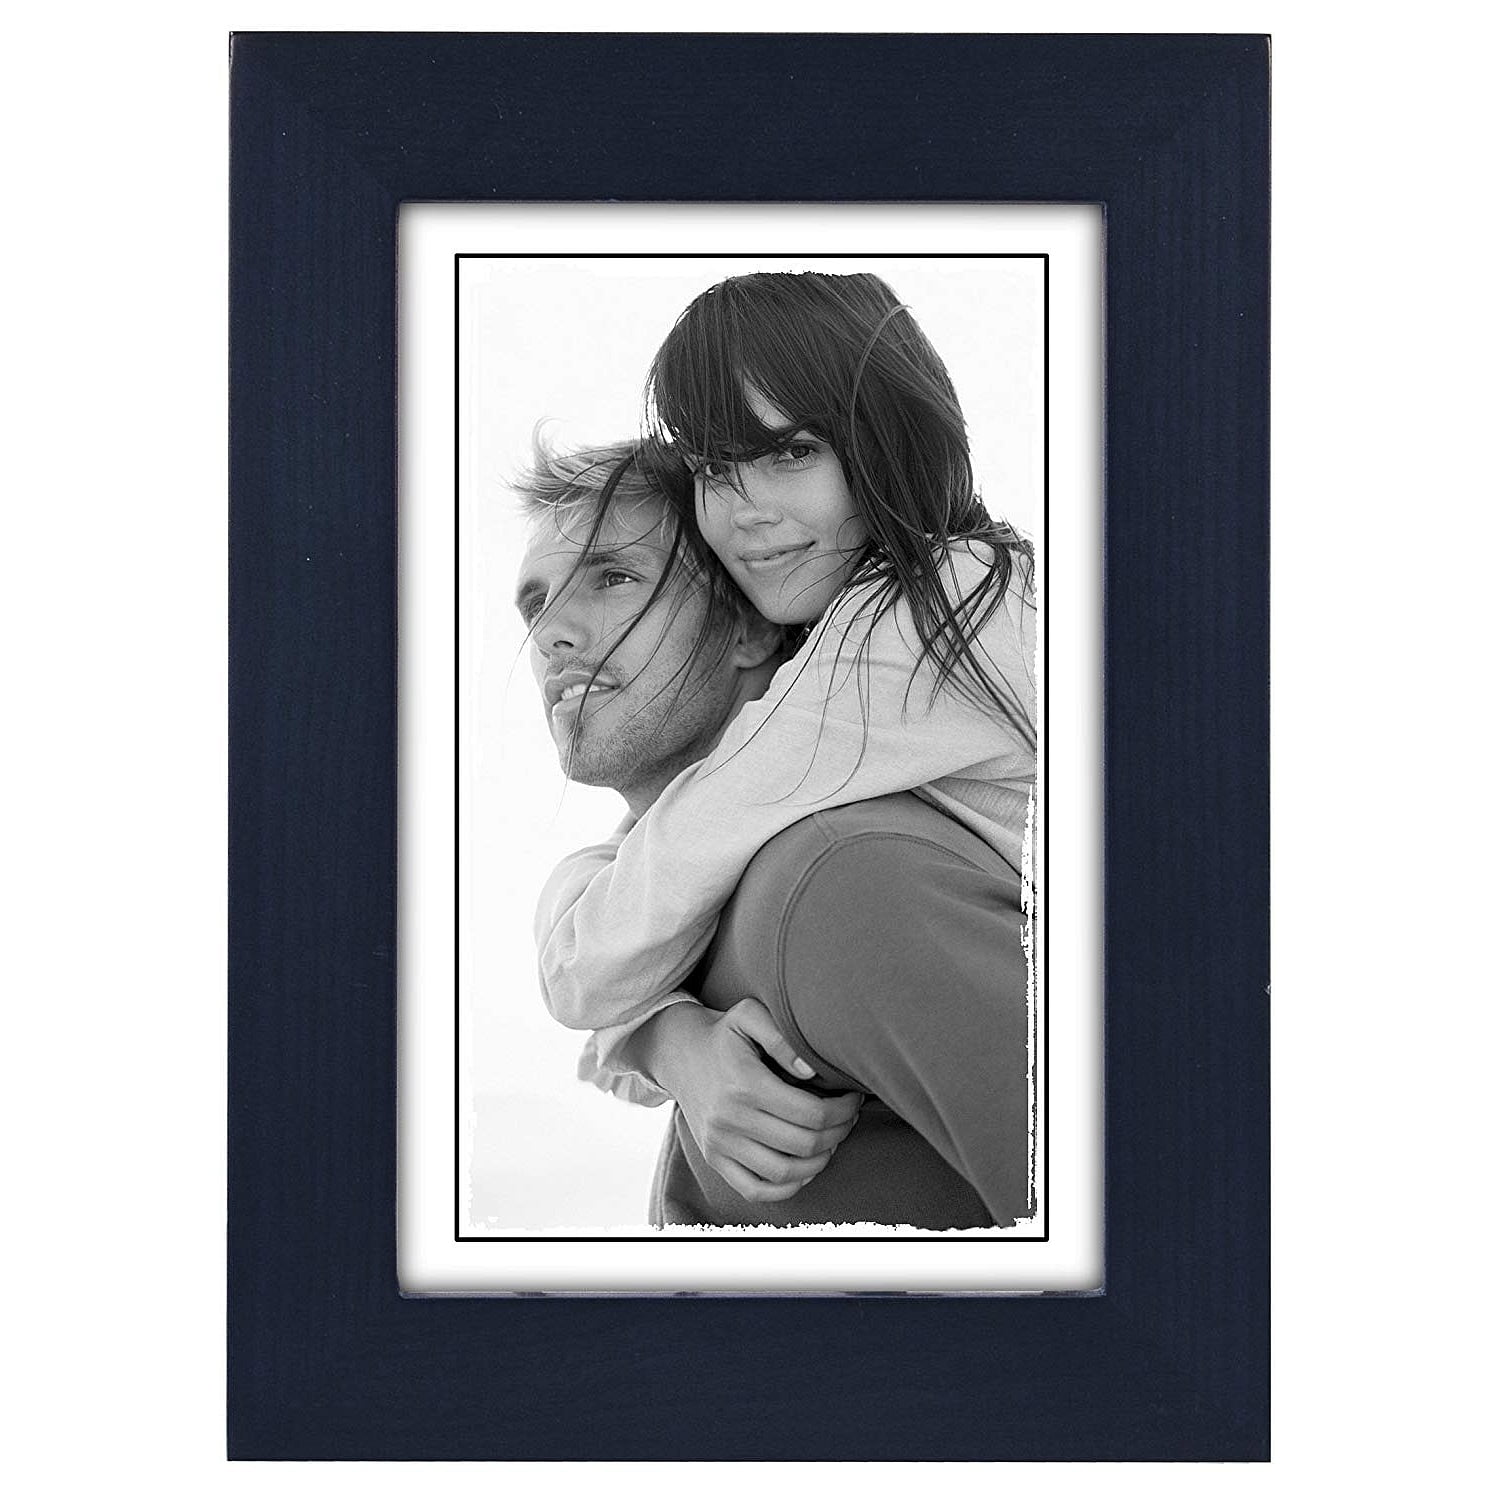 Malden Puzzle 9 Opening Collage Hanging Picture Frame, Black